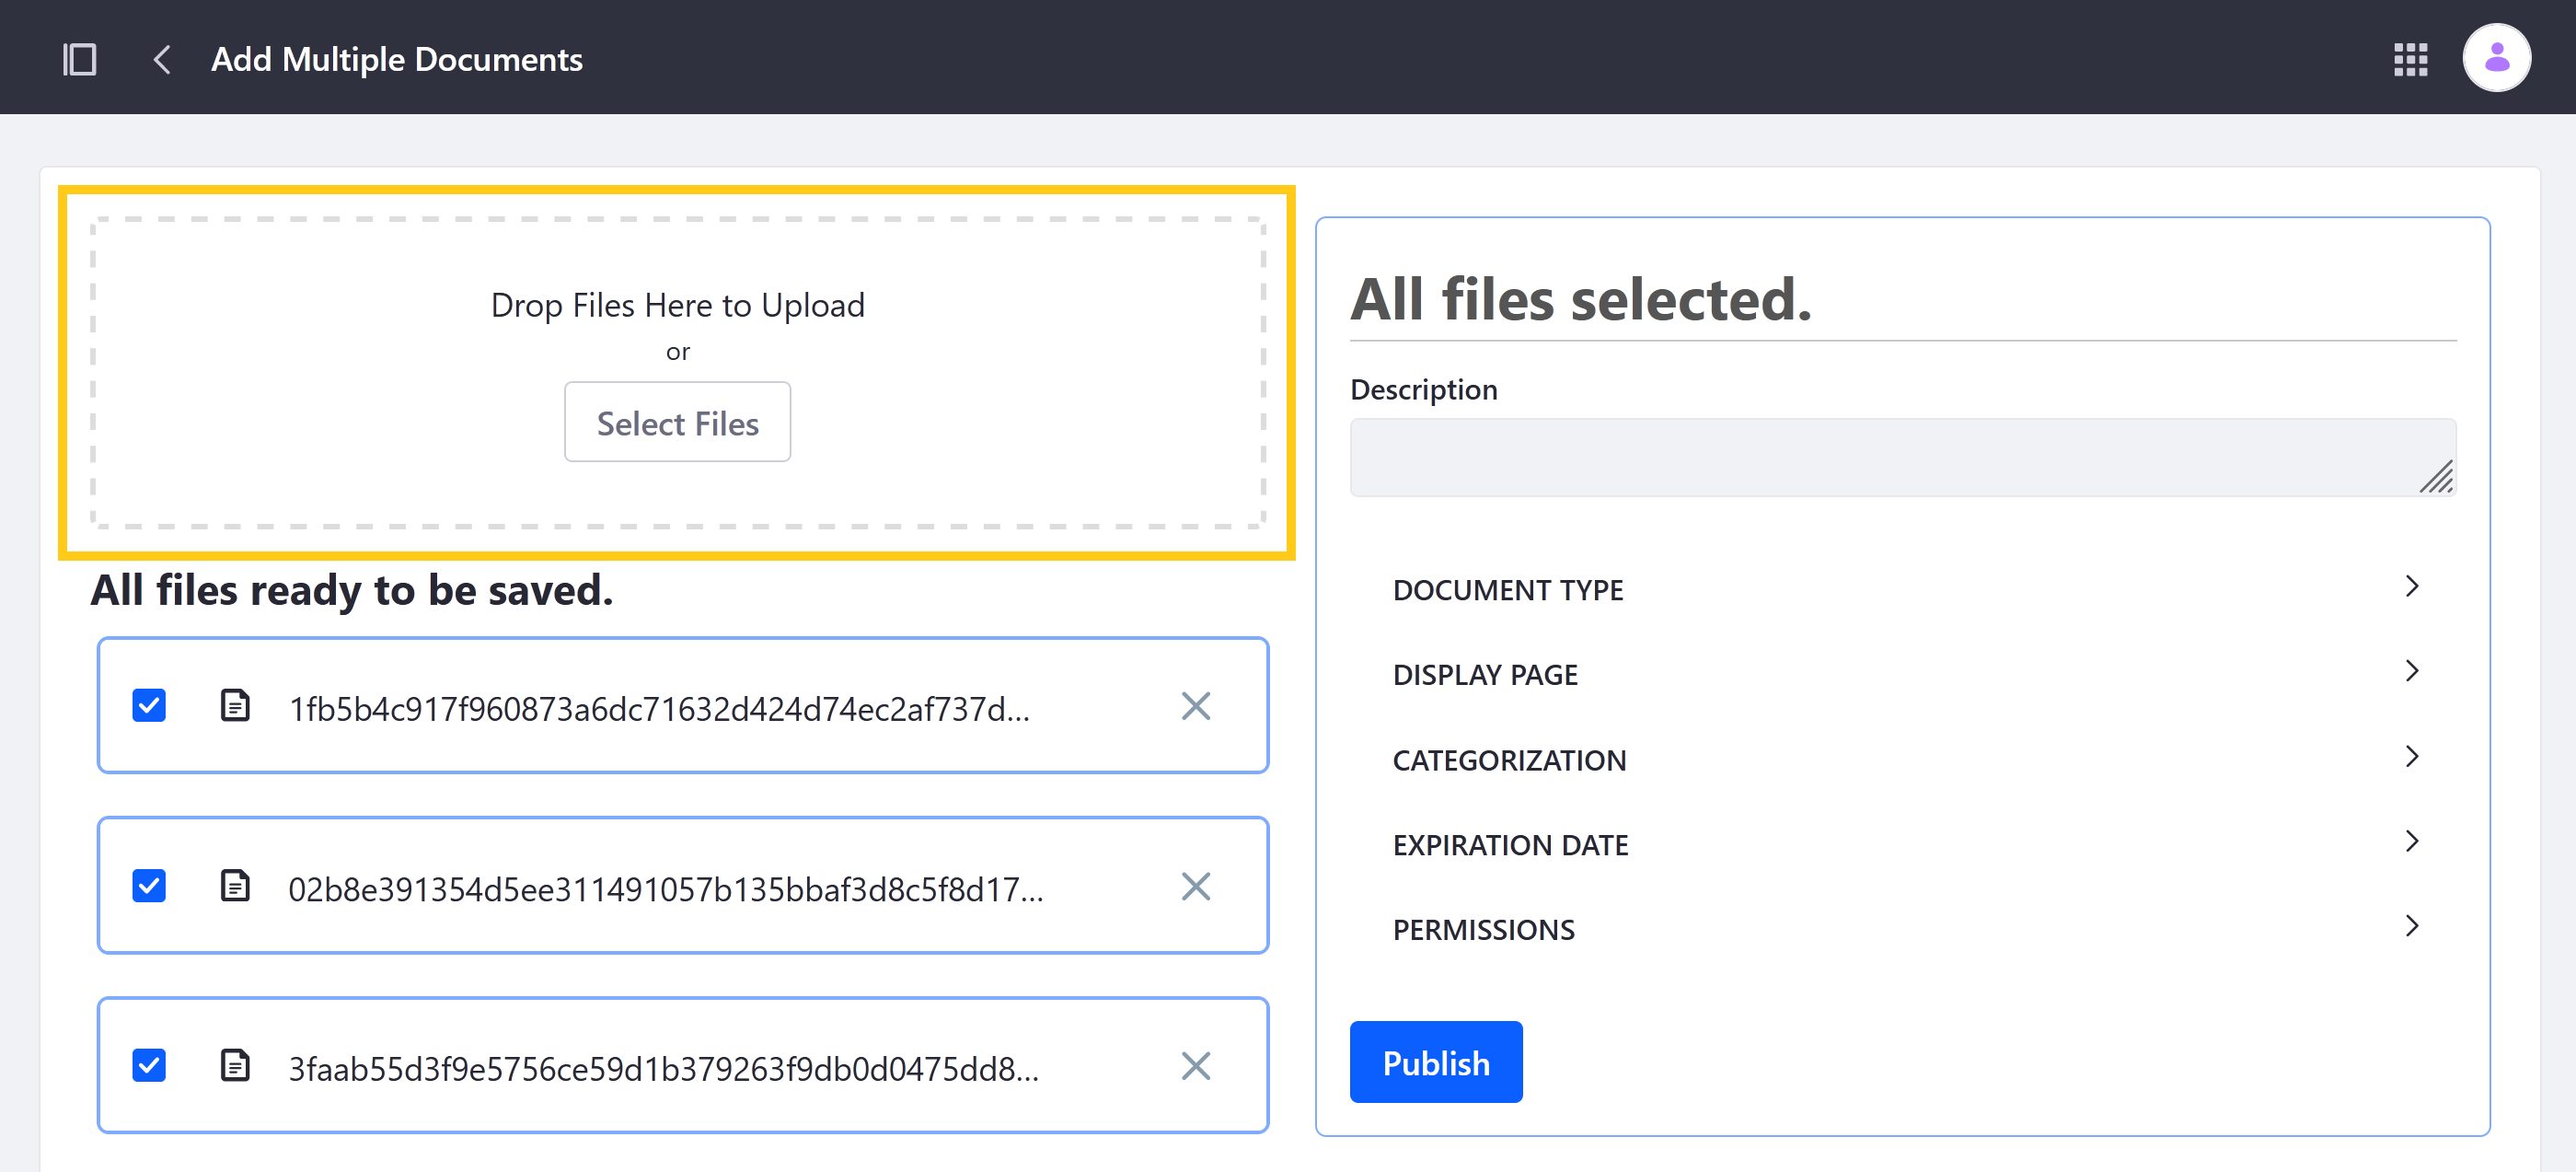 Drag and drop or select multiple files to upload.